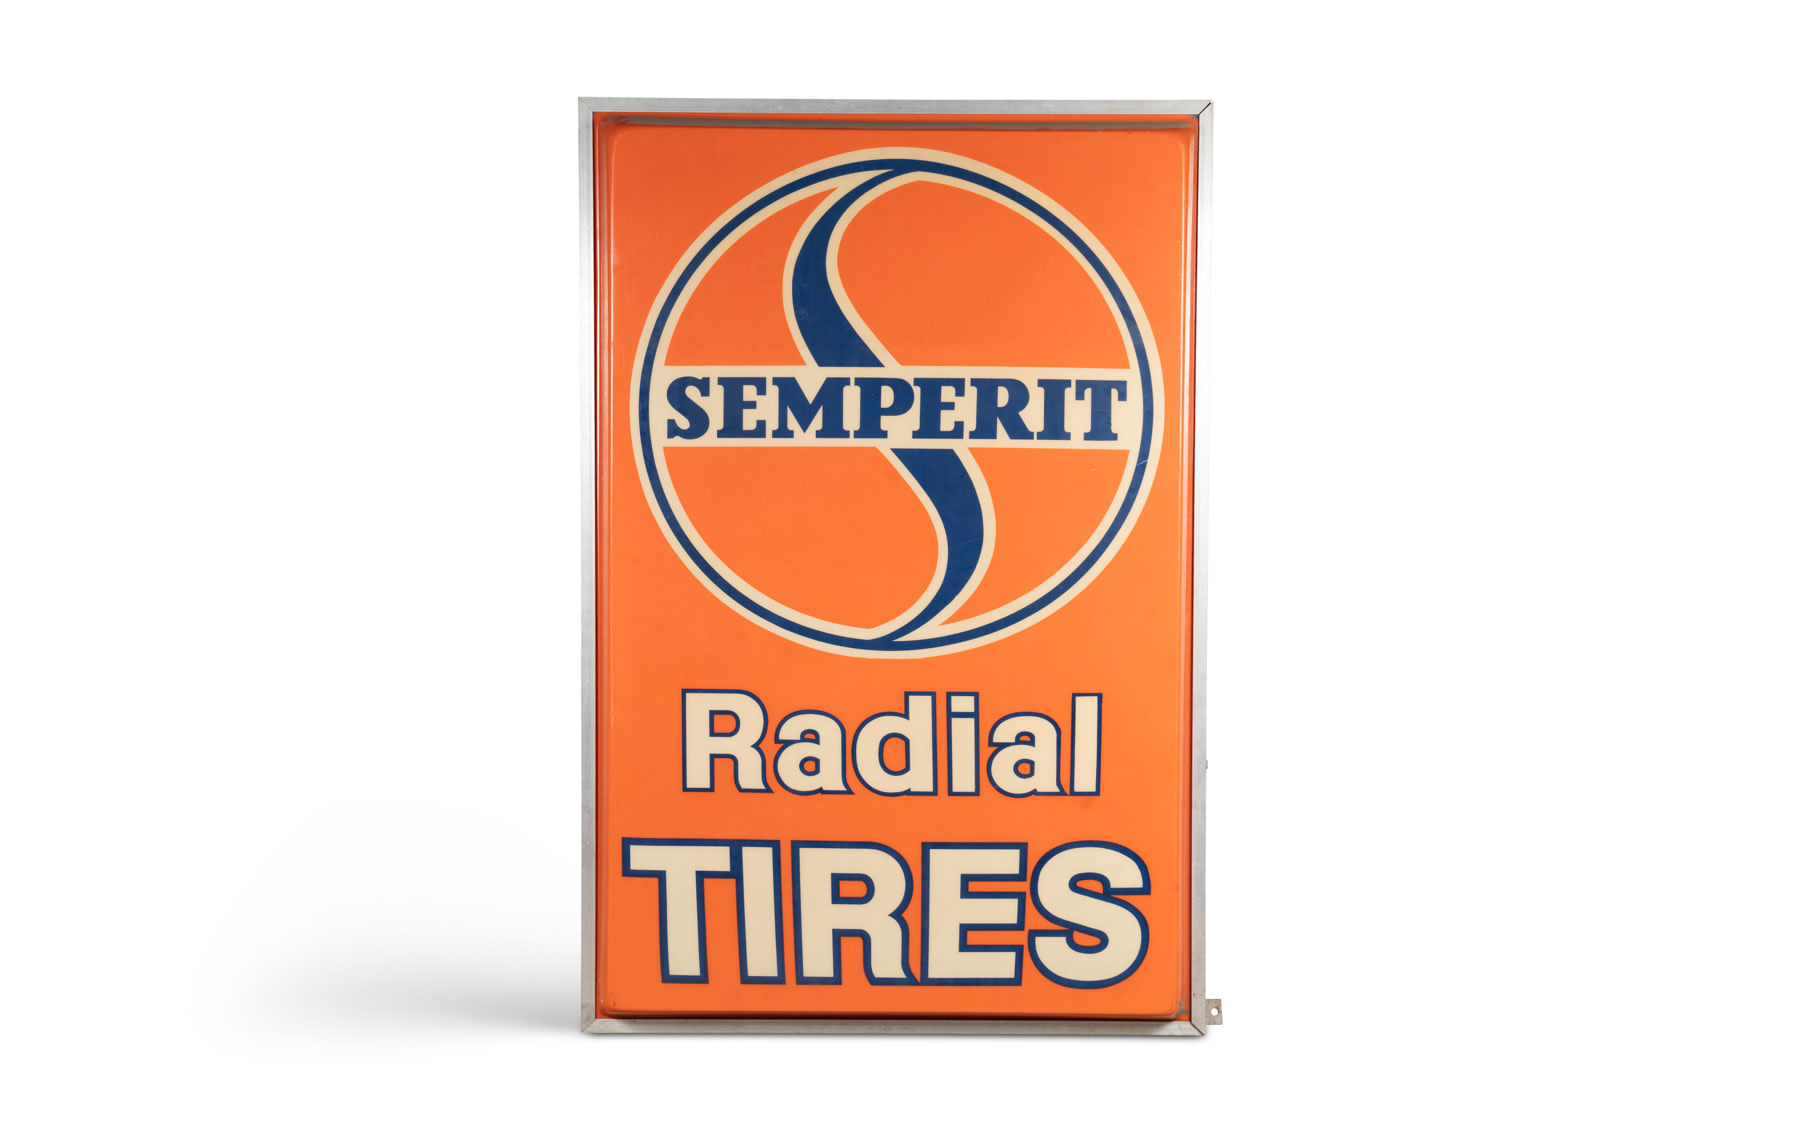 Illuminated Semperit Radial Tires Sign by Essex/NPI Illuminated Designs, Double Sided